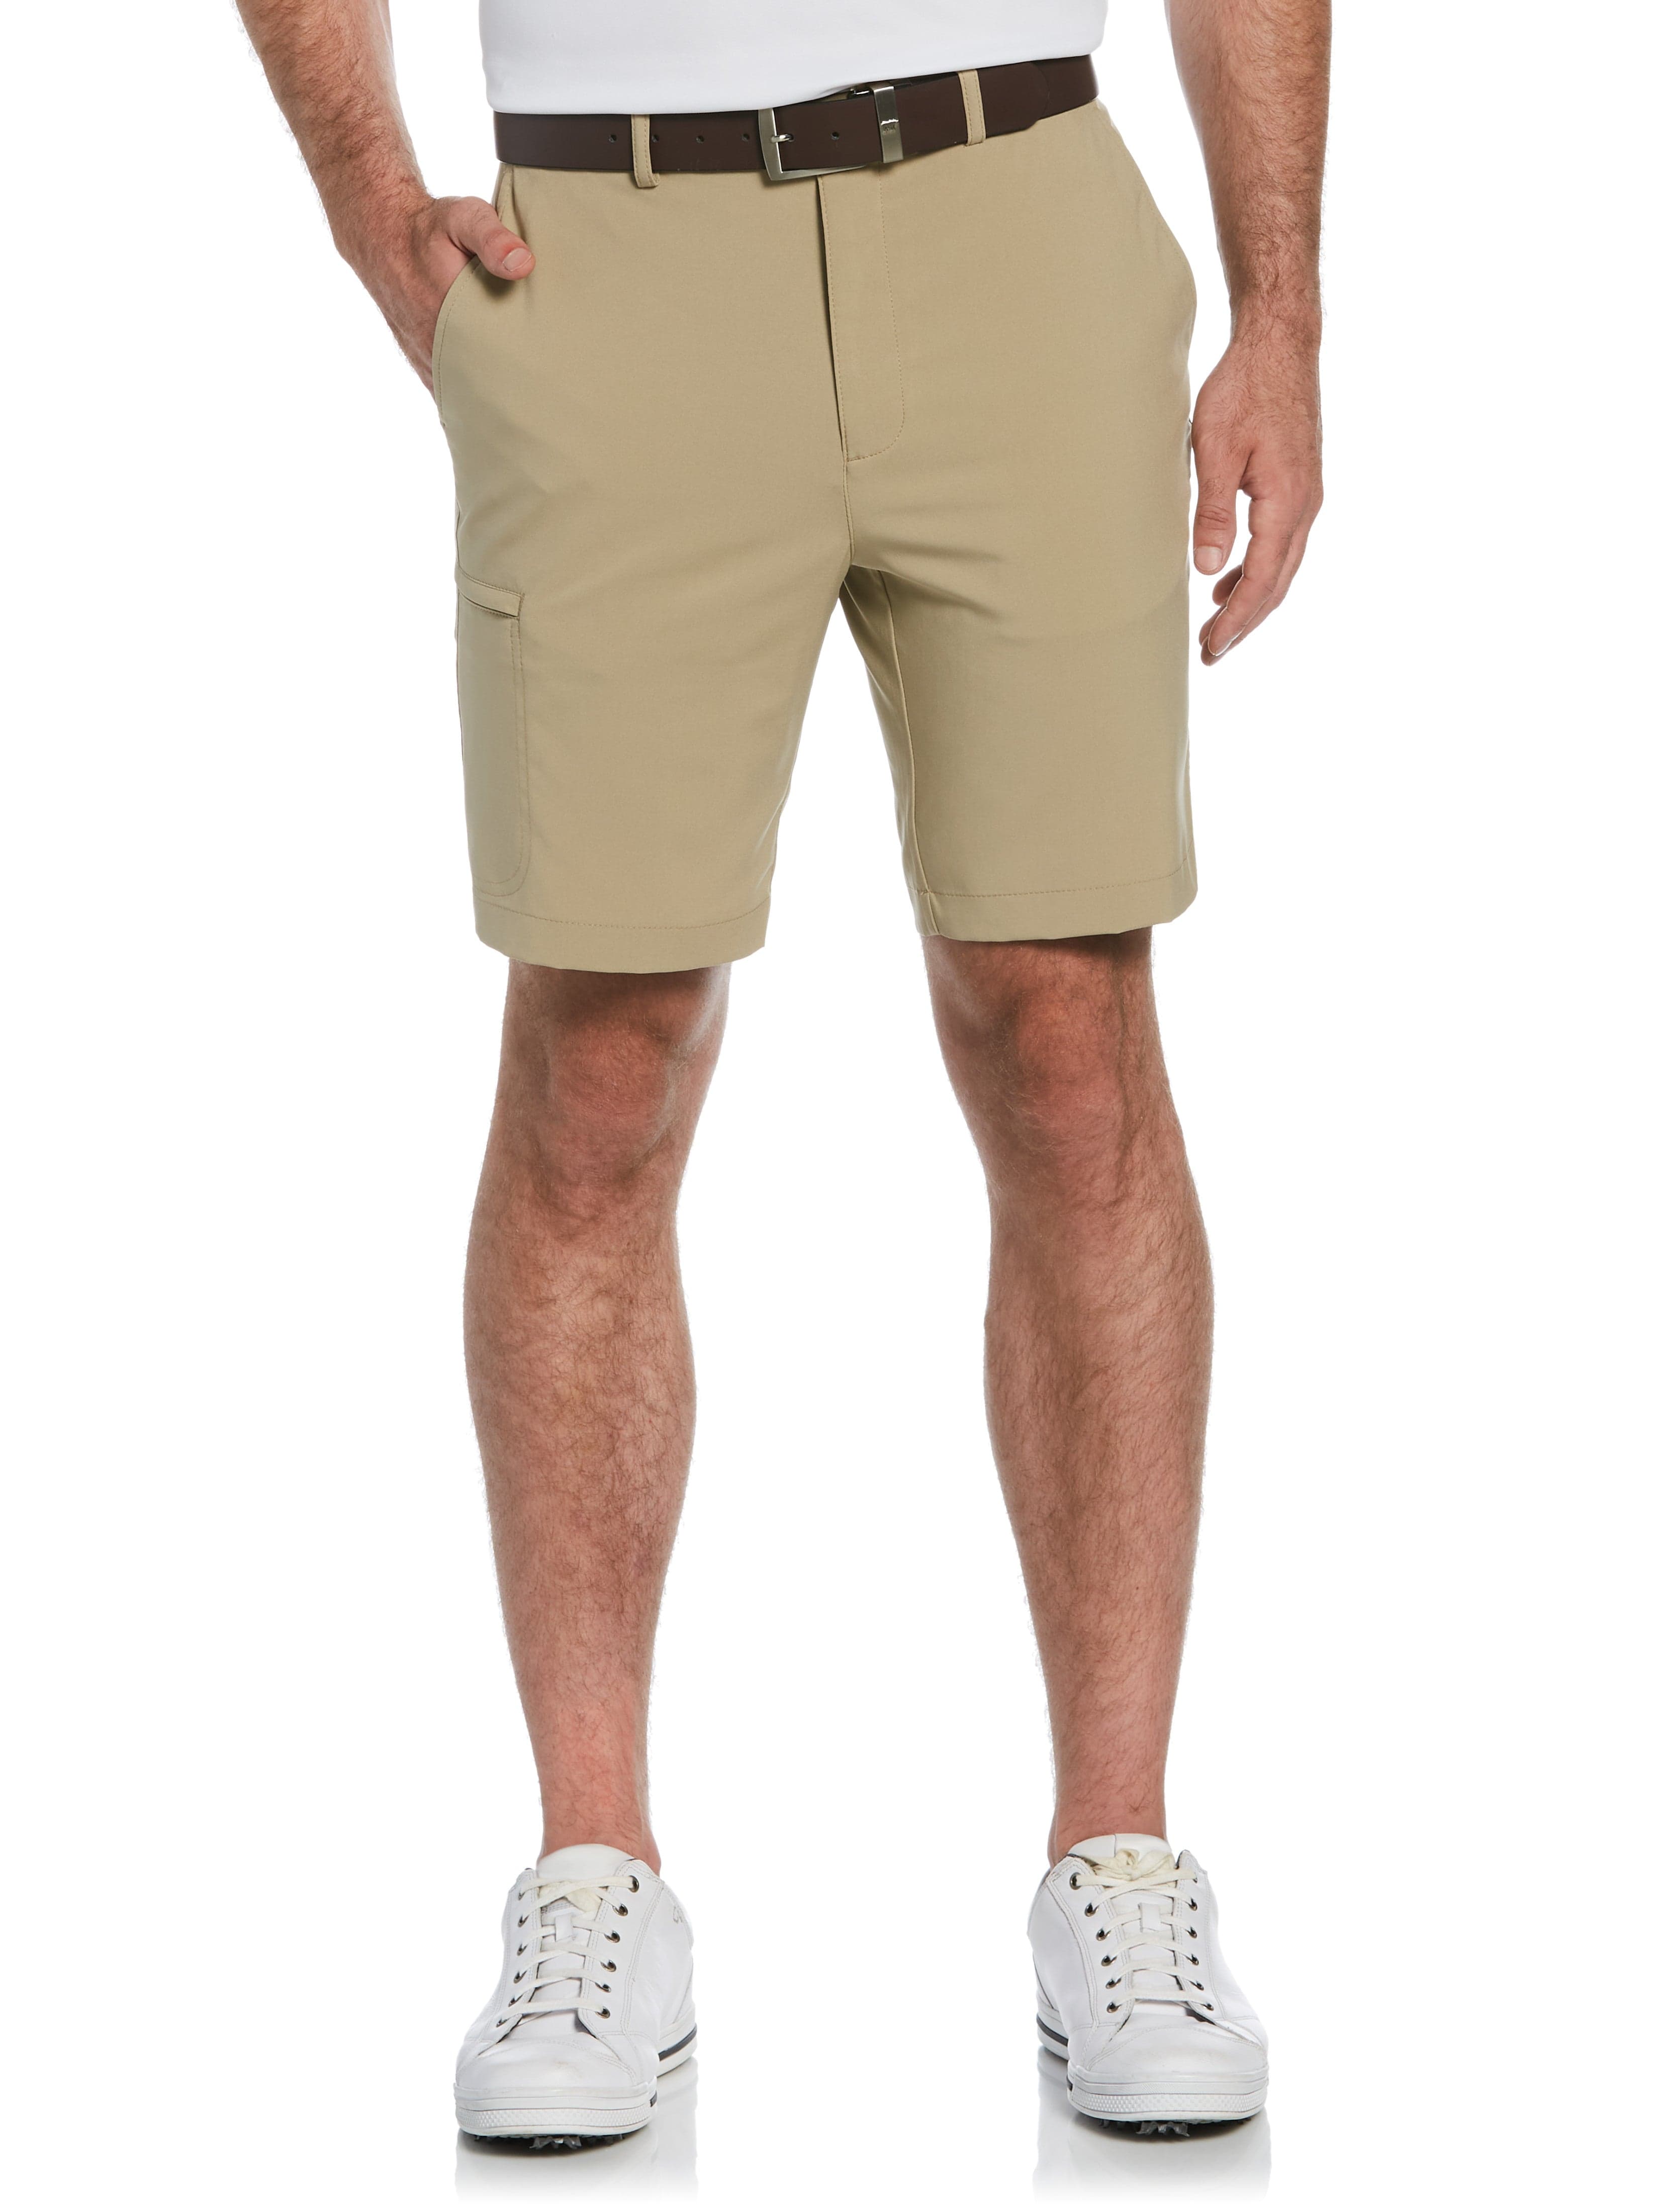 Jack Nicklaus Mens Flat Front Solid Golf Shorts w/ Cargo Pocket, Size 38, Chinchilla Beige, 100% Polyester | Golf Apparel Shop